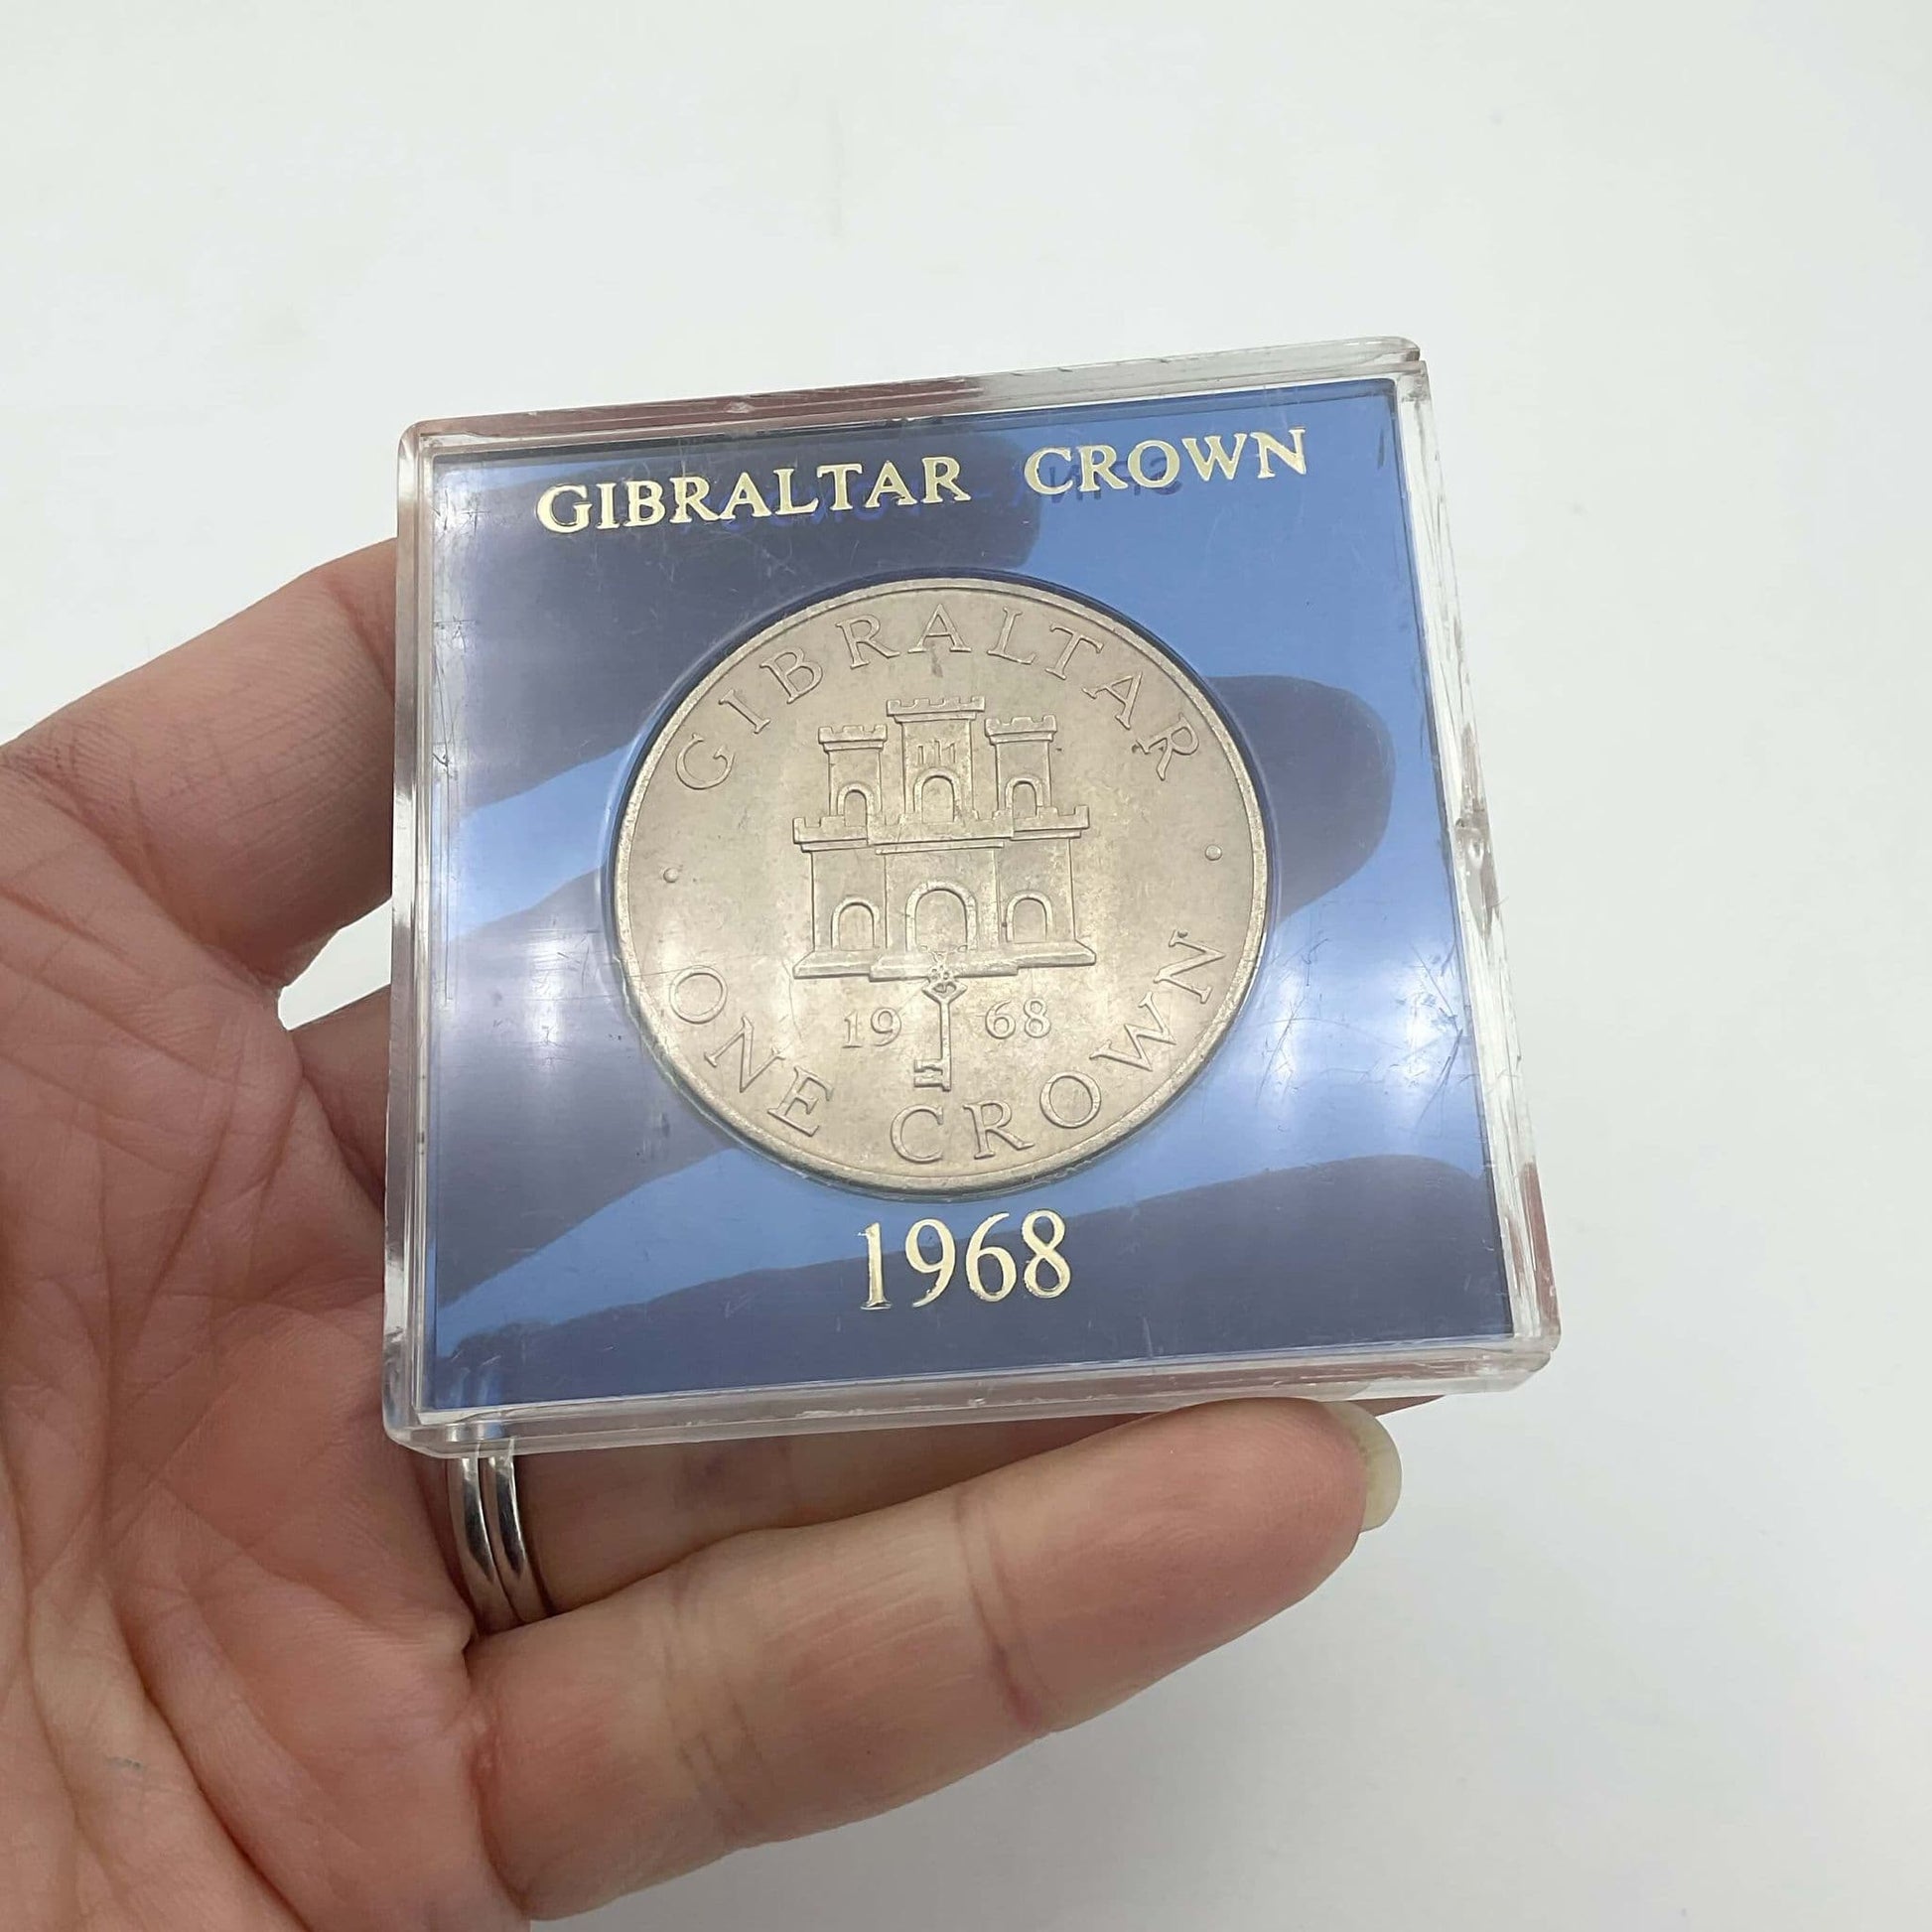 Silver Gibraltar Crown coin in a blue case held in a hand